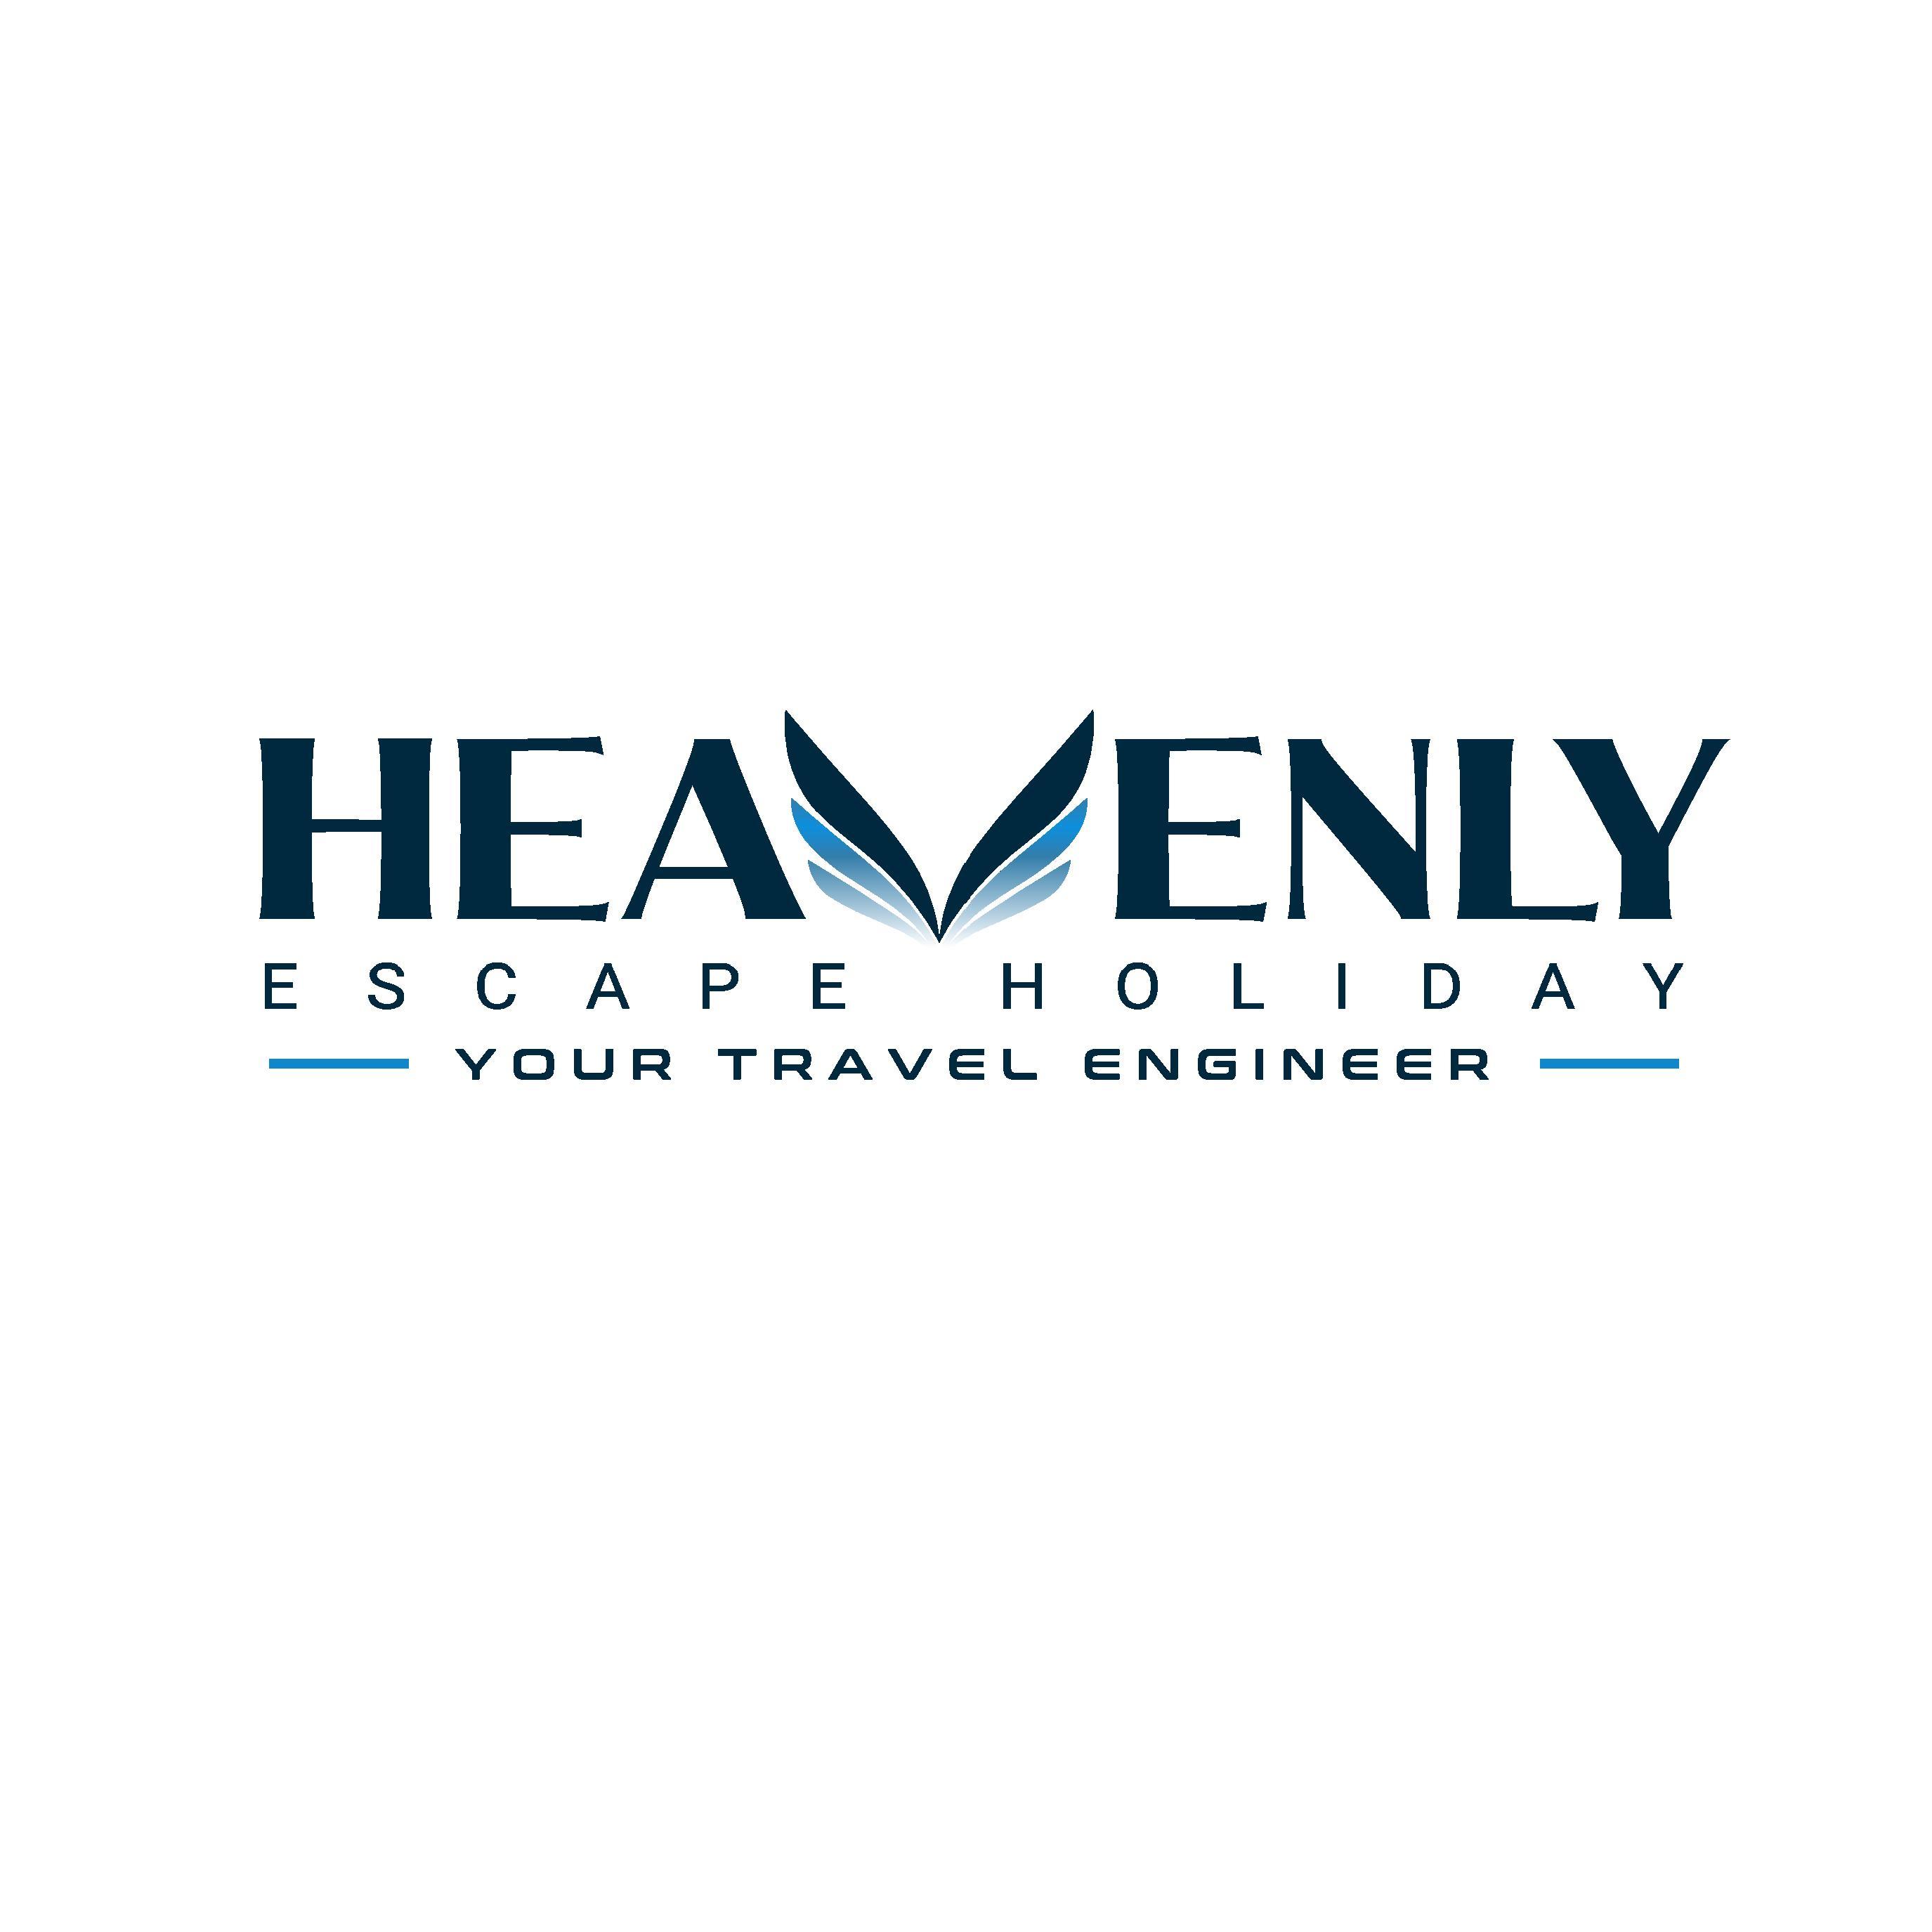 jobs in Heavenly Escape Holiday Sdn Bhd